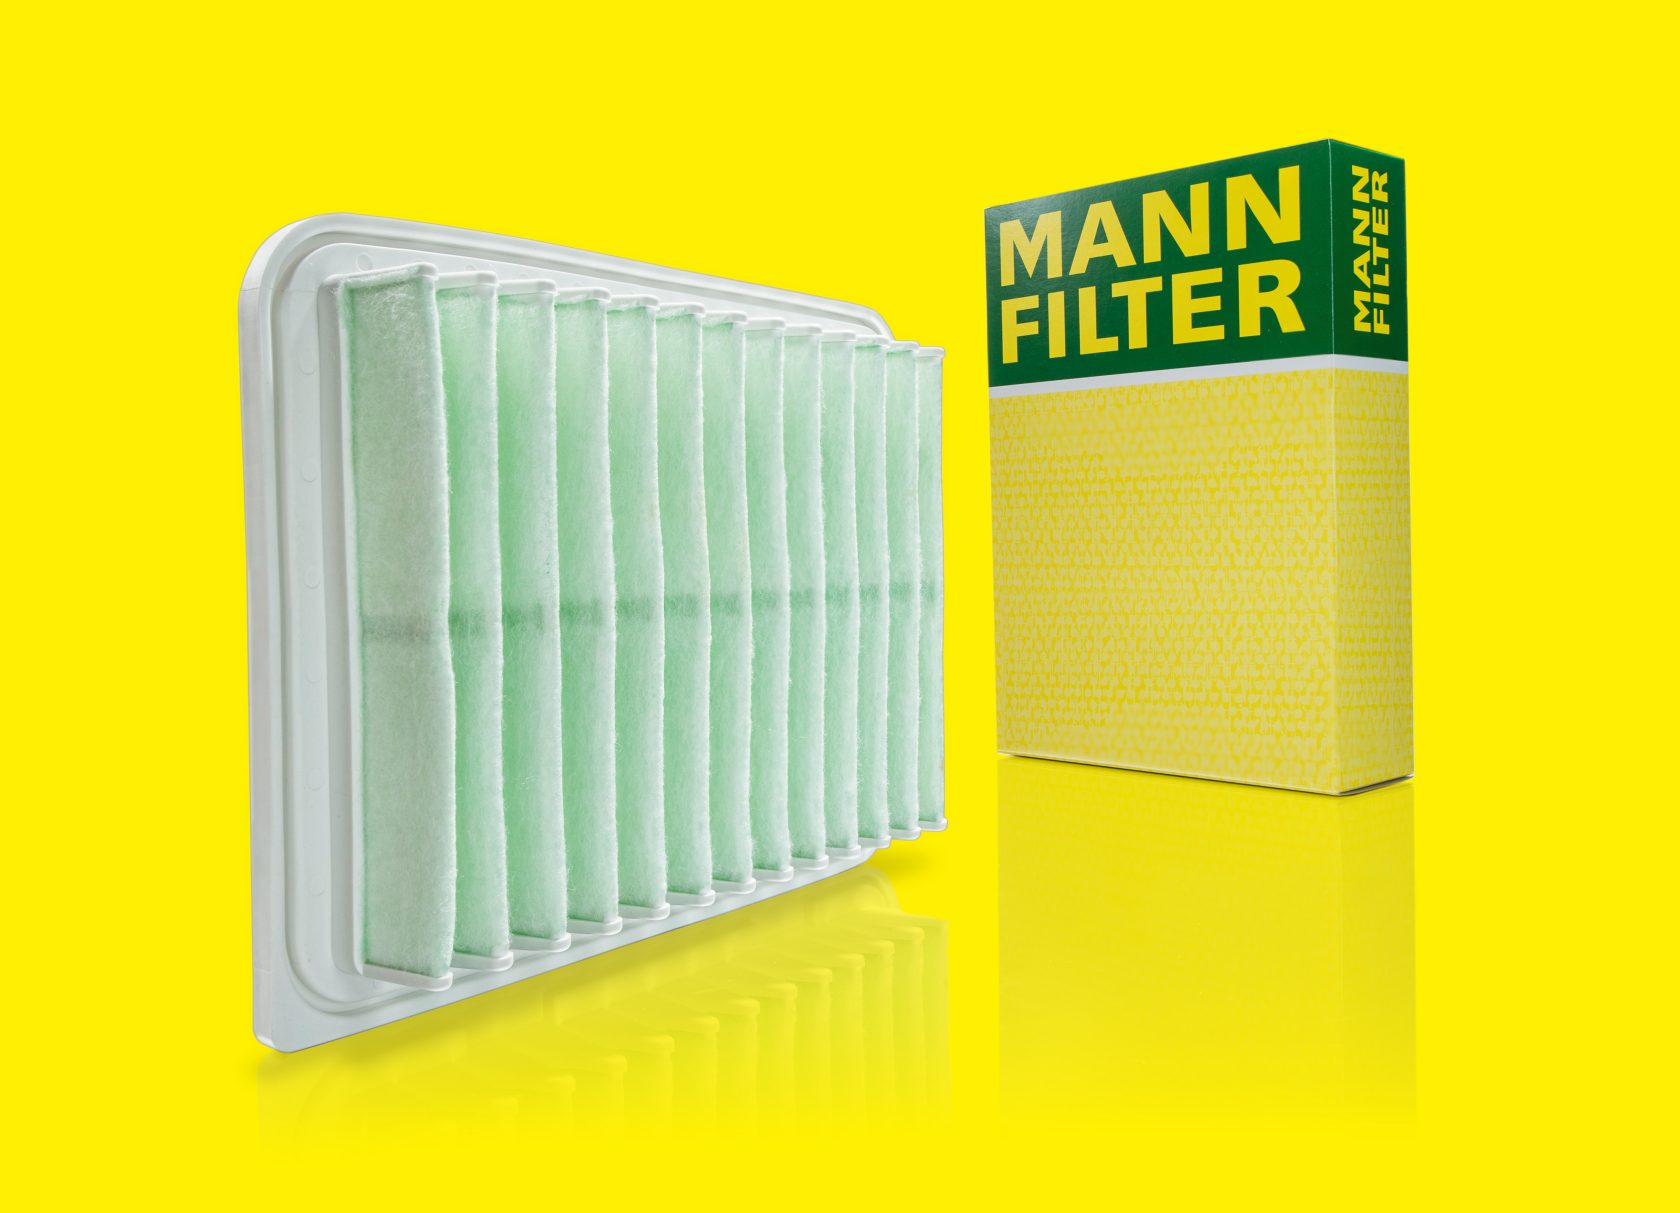 MANN-FILTER sustainable filter production